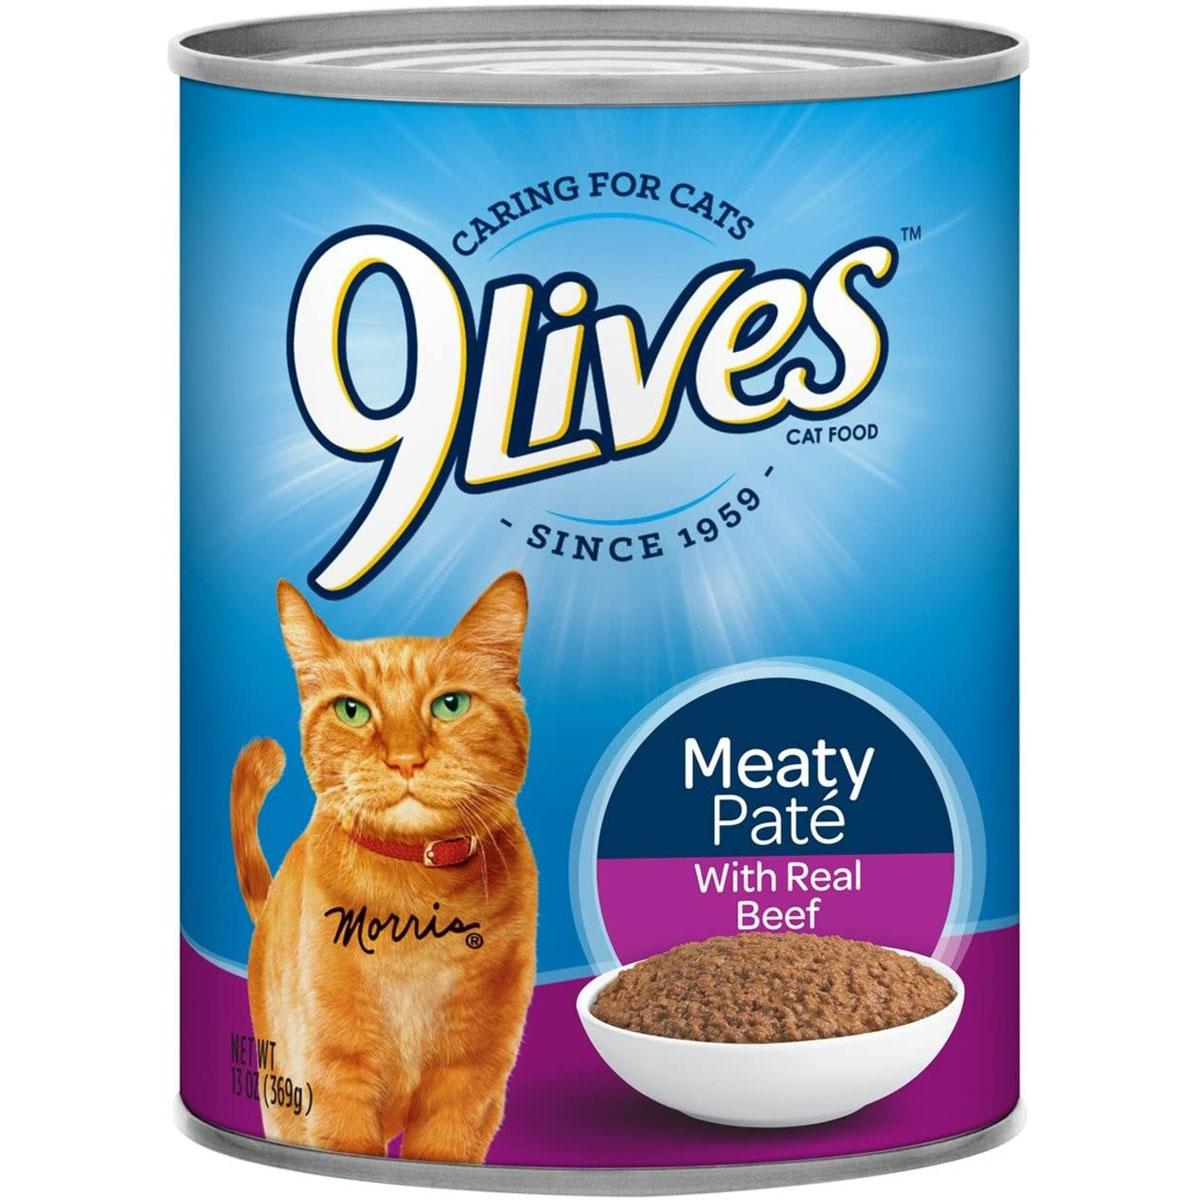 12 9Lives Meaty Pate Wet Cat Food with Real Beef for $8.79 Shipped